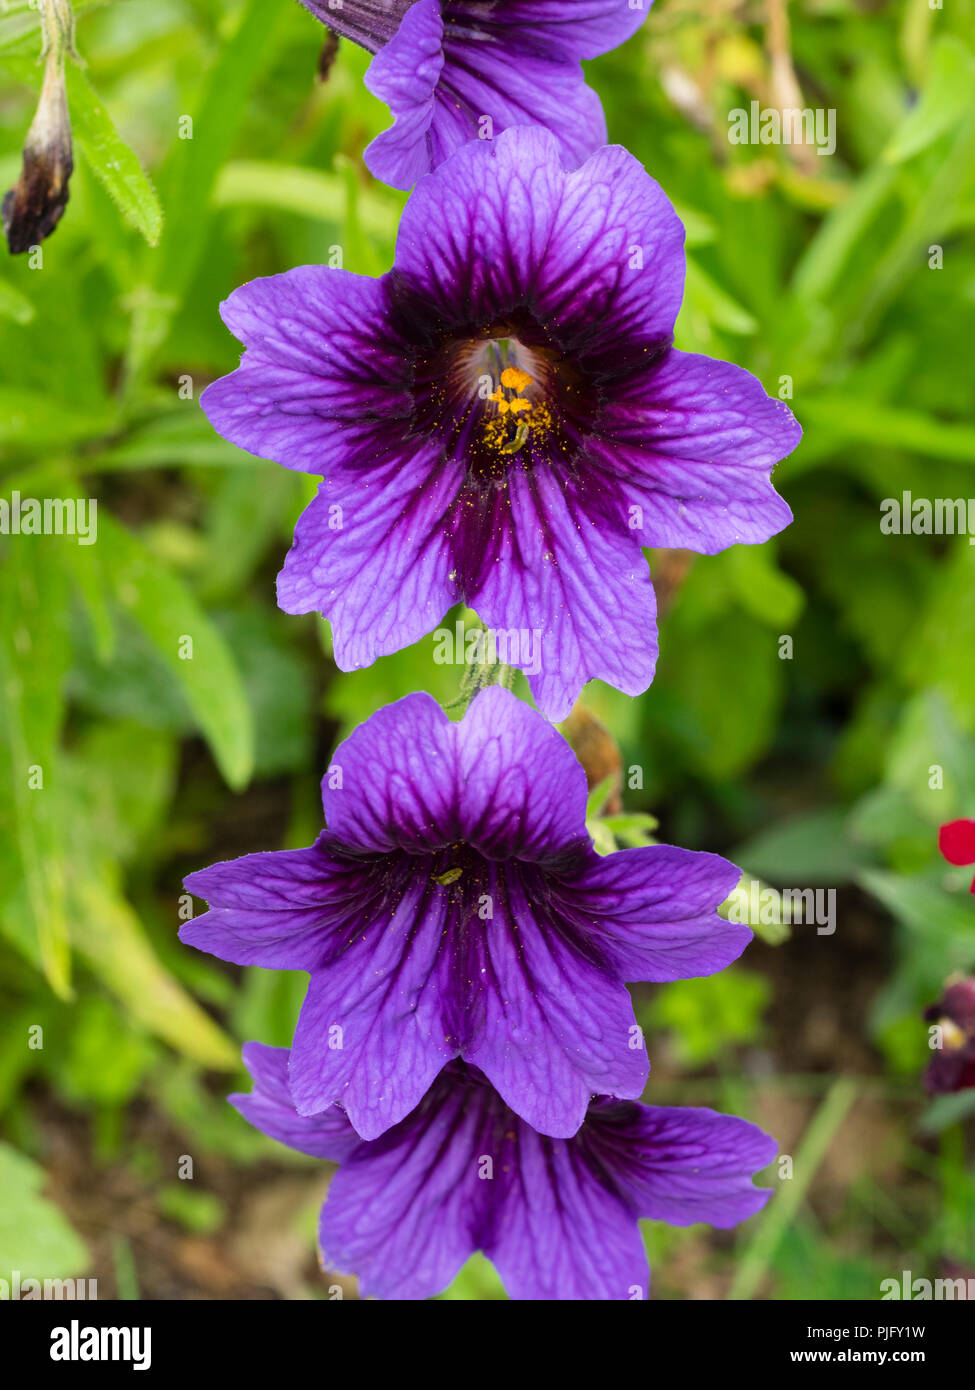 Exotic, velvety, dark throated purple blue flowers of the hardy annual bedding plant, Salpiglossis sinuata 'Kew Blue' Stock Photo